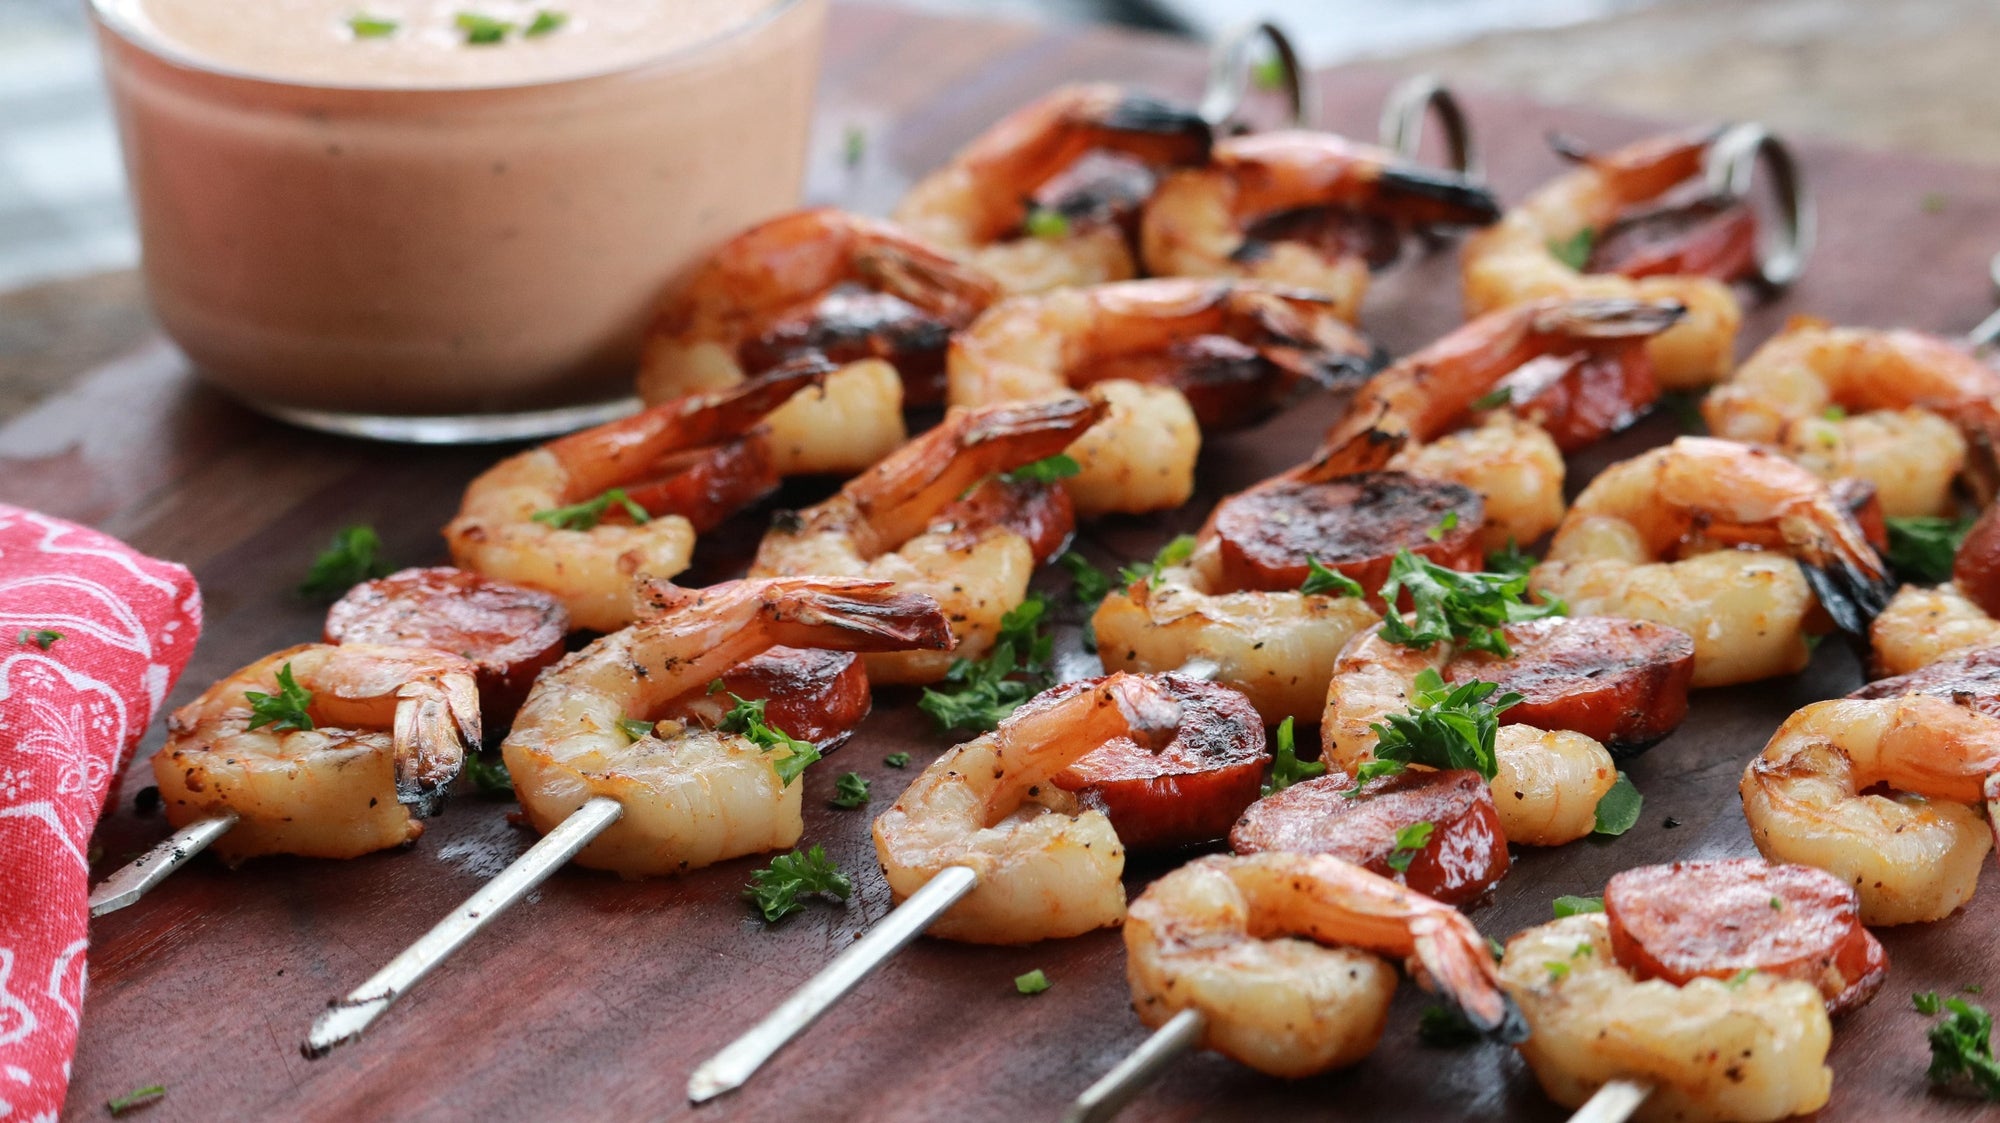 Cajun Shrimp and Andouille Sausage Skewers with Mississippi Comeback Sauce